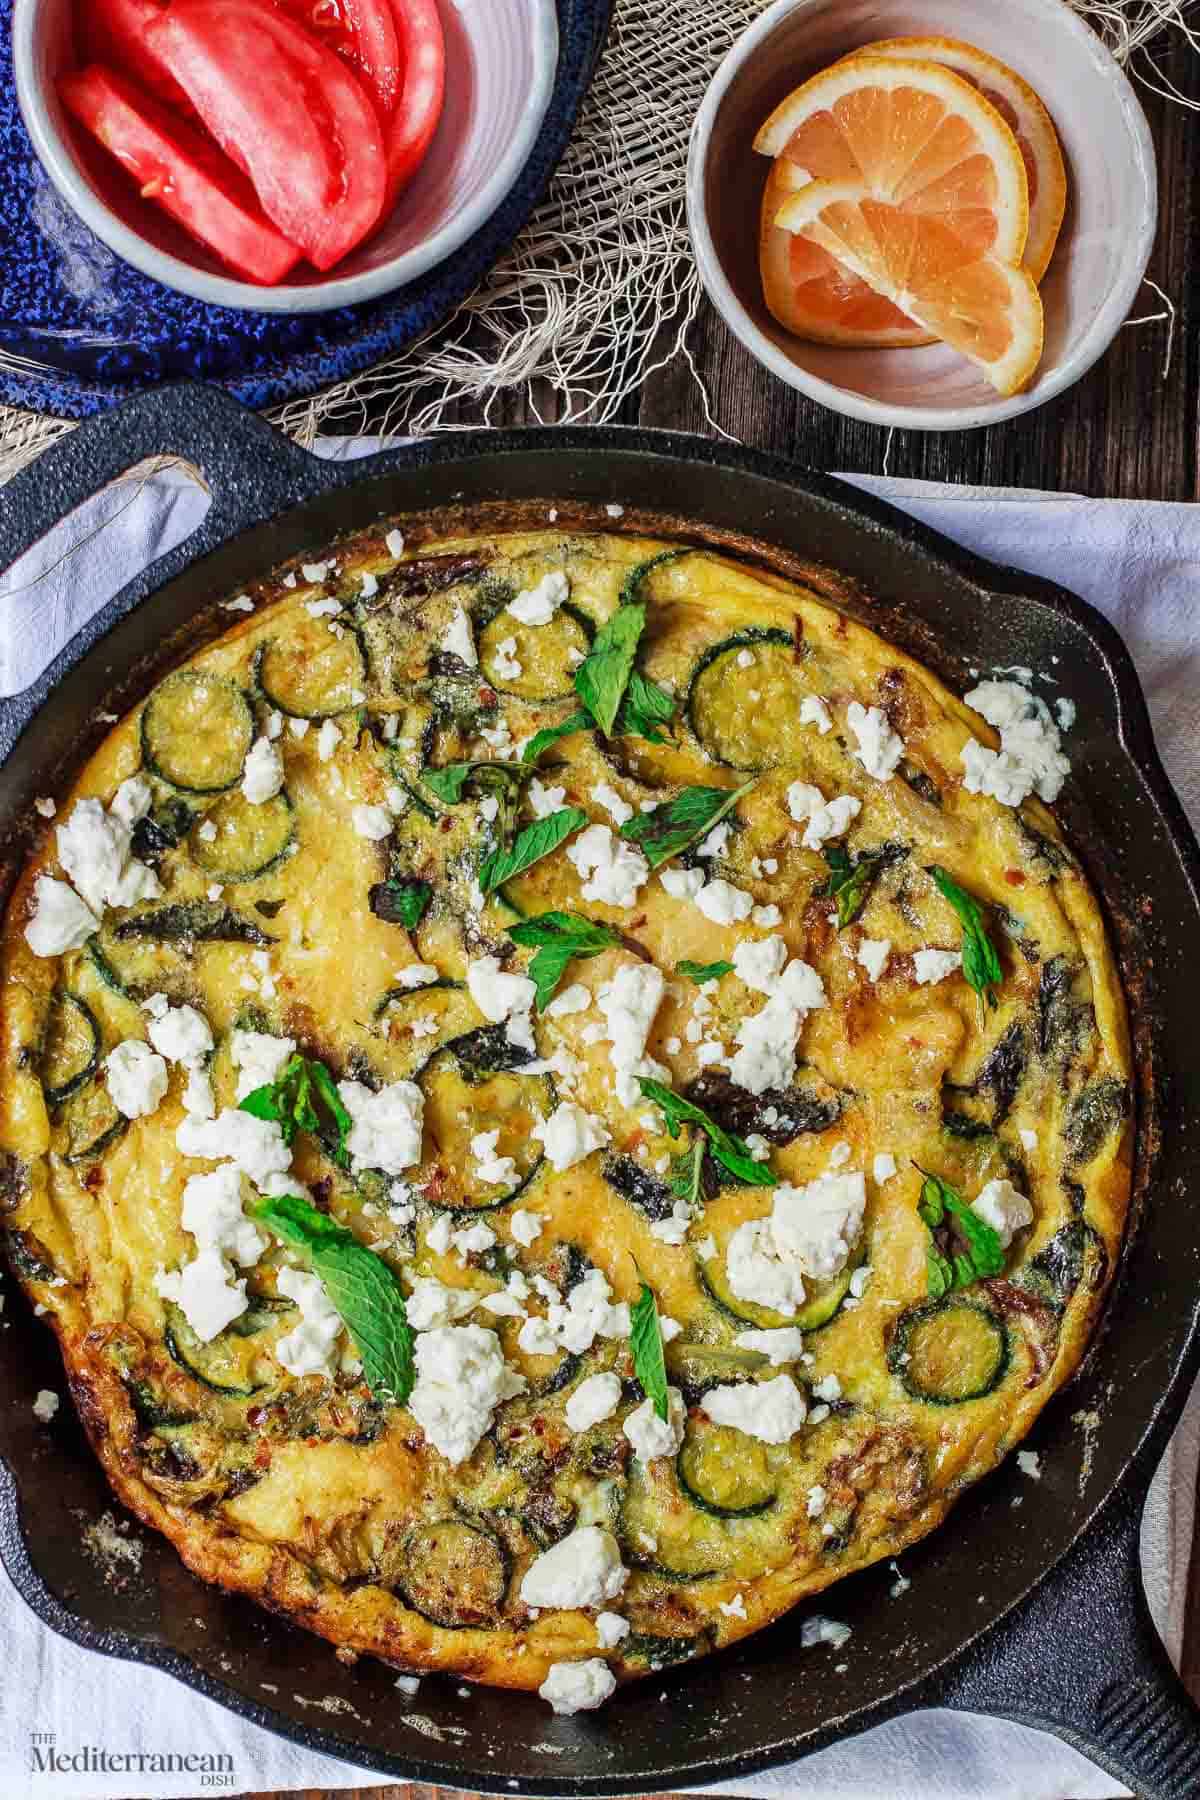 baked omelet with zucchini in a cast-iron skillet.